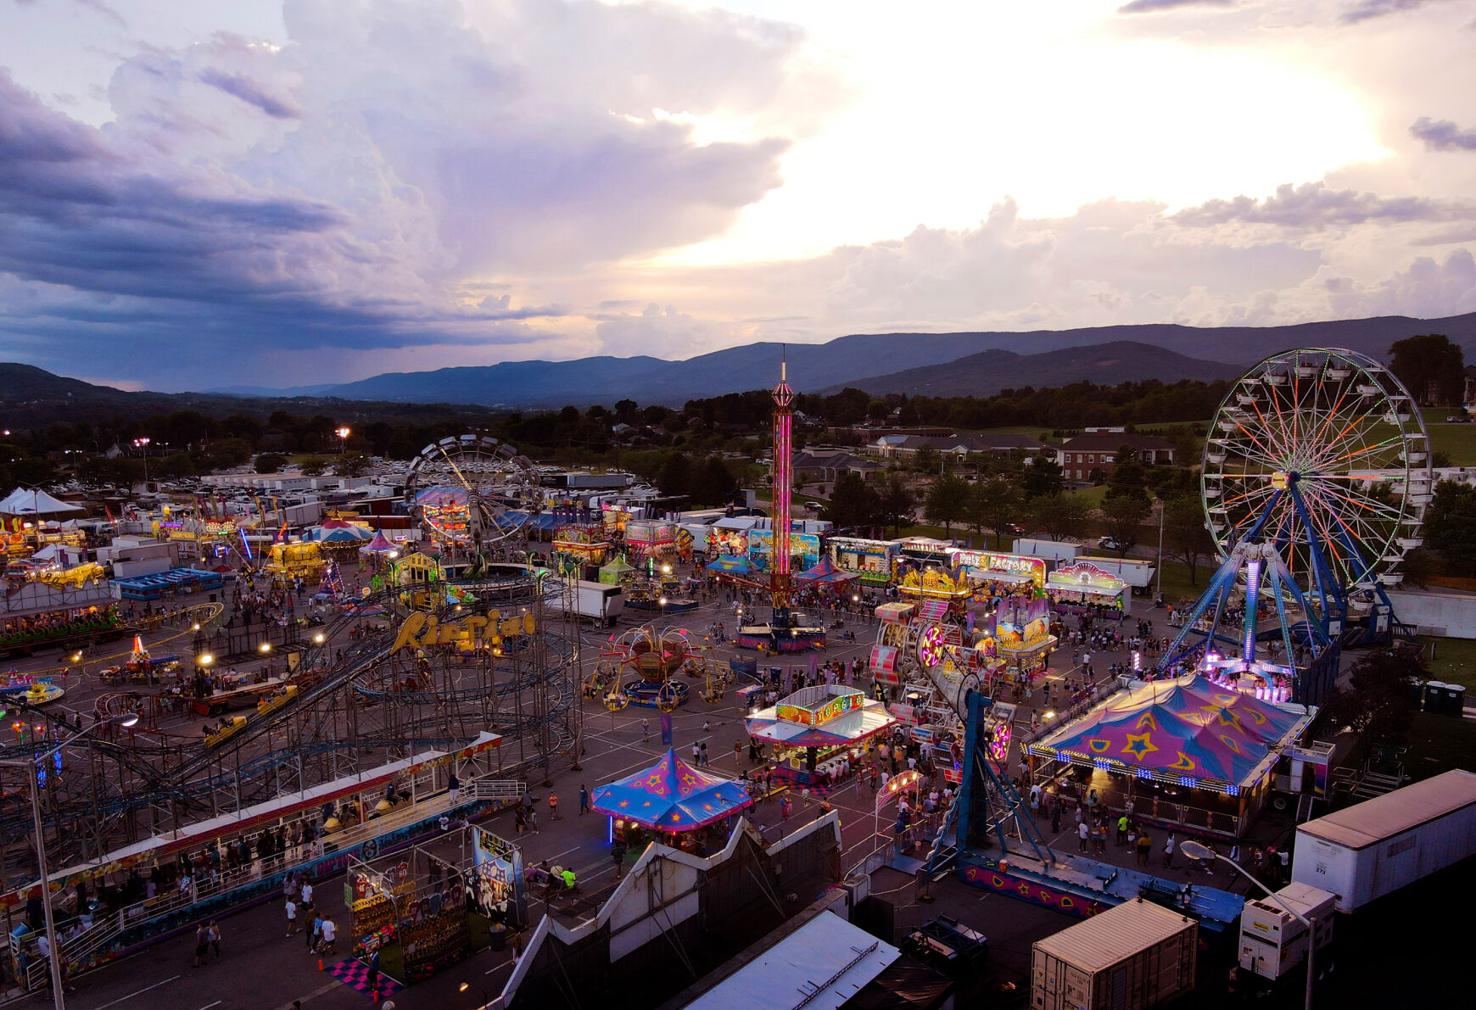 Photos and video Scenes from the 2021 Salem Fair